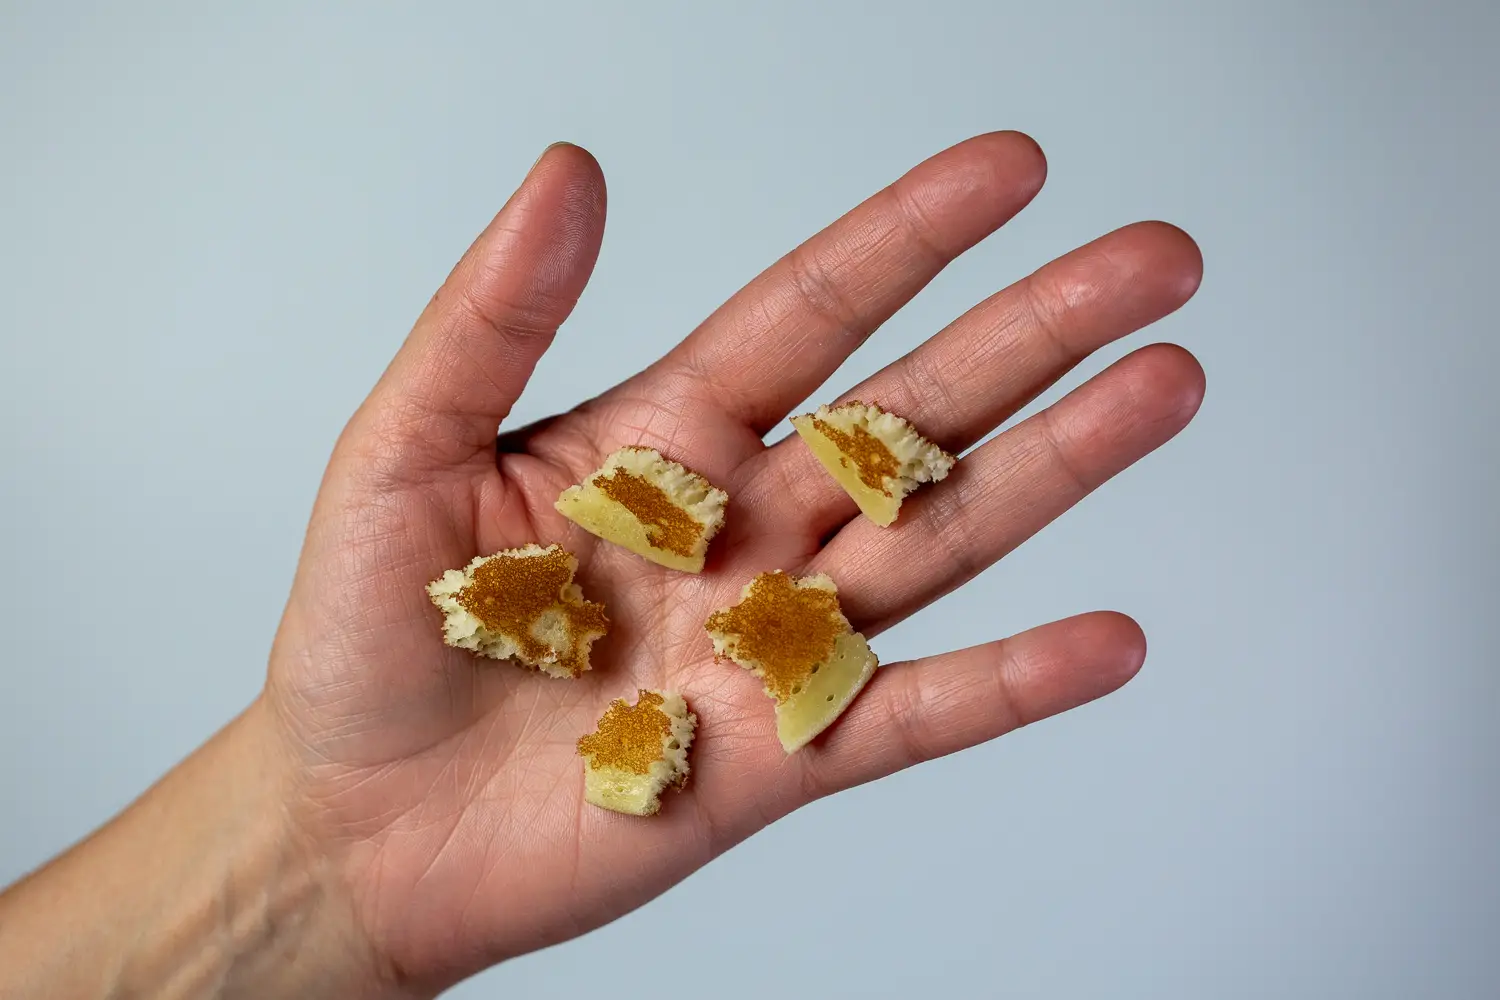 a hand holding five bite-sized pieces of pancake in the palm